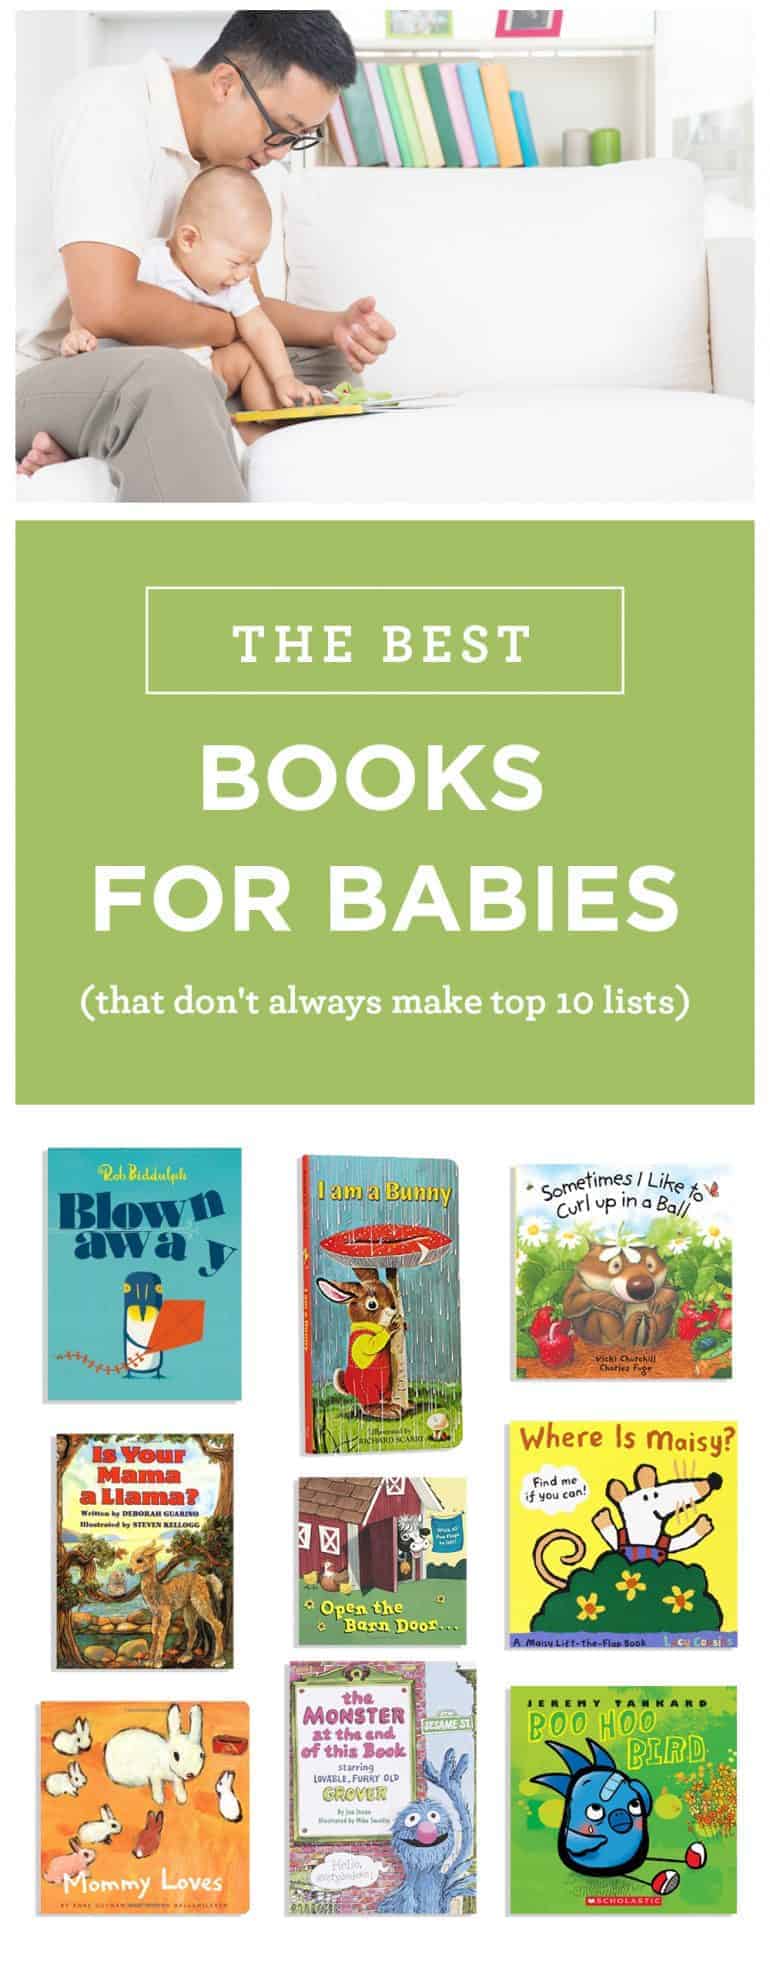 Best Books for Babies (that don't always make top 10 lists)